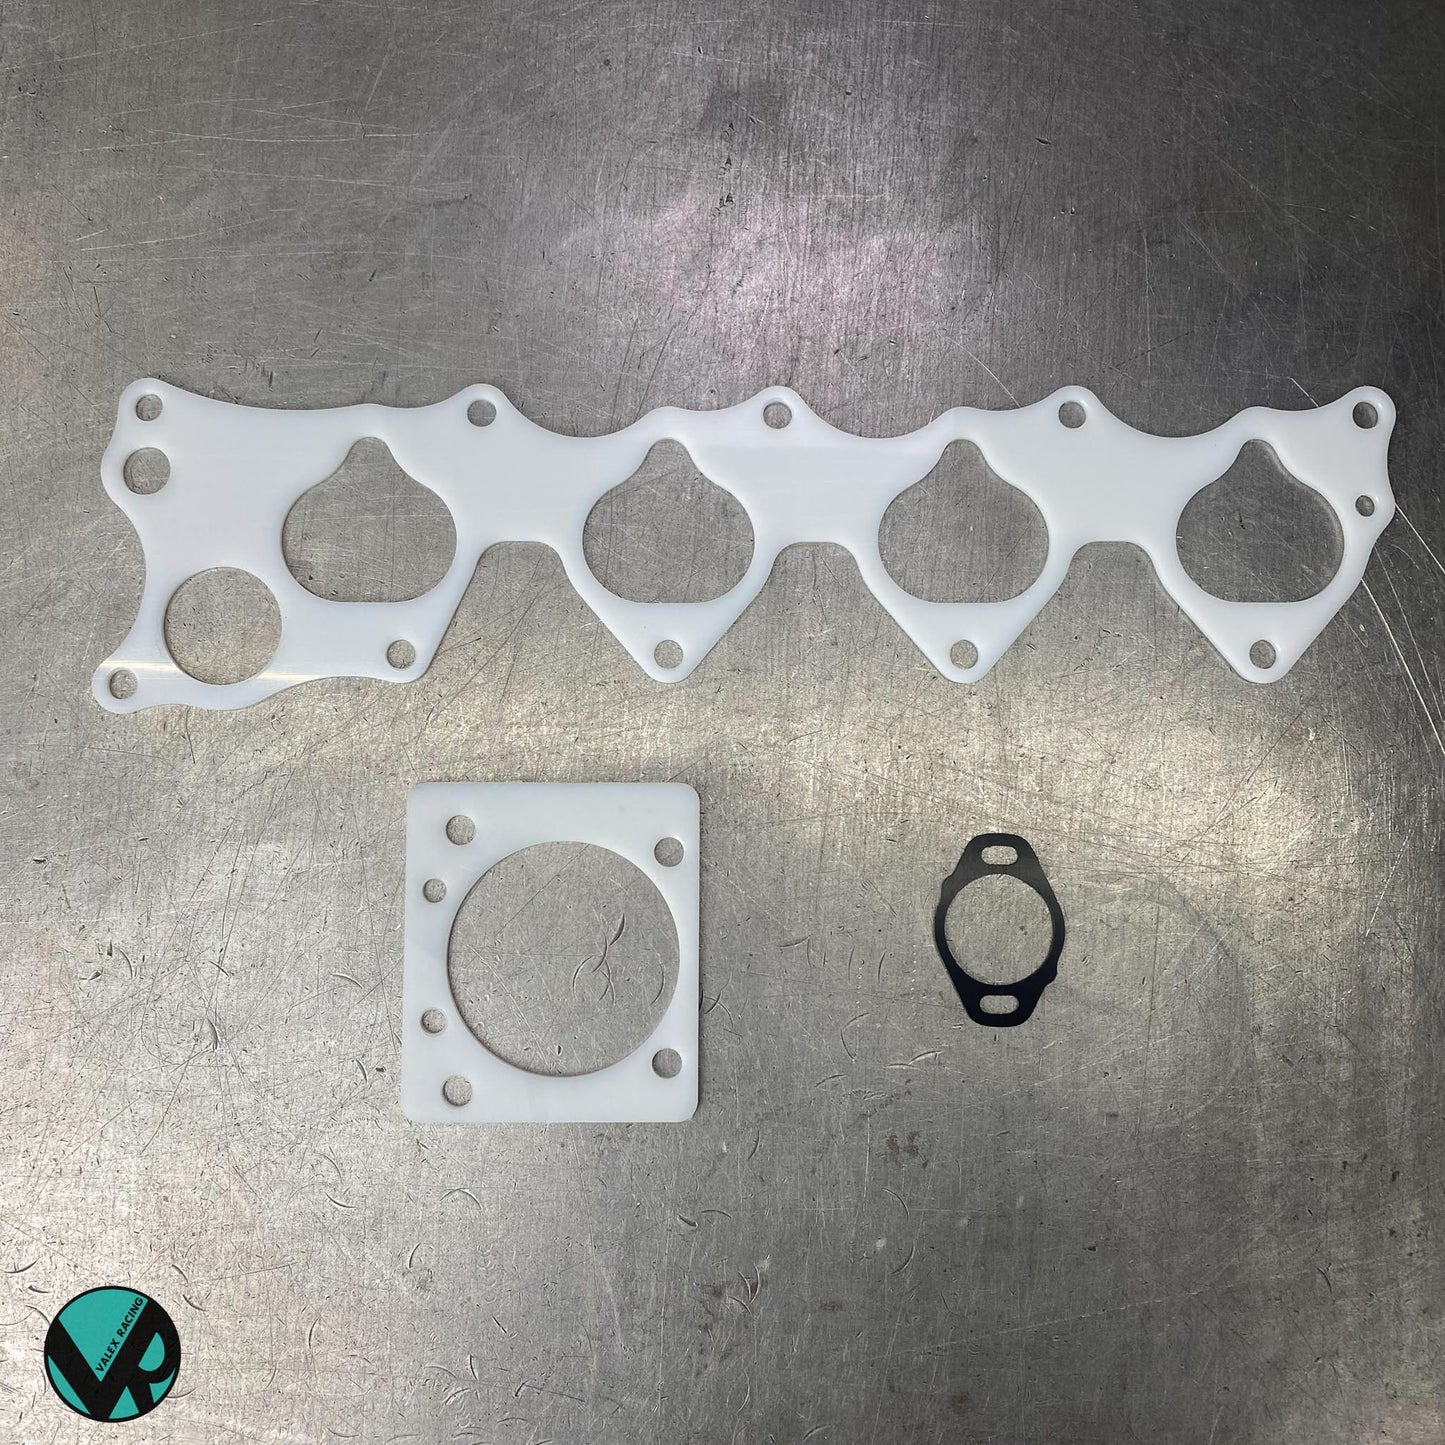 F20C F22C1 S2000 | Honda Acura Reusable Thermal Intake Manifold Gasket, Skunk2 Pro Series Thermal Throttle Body Gasket, and Thermal TPS Gasket